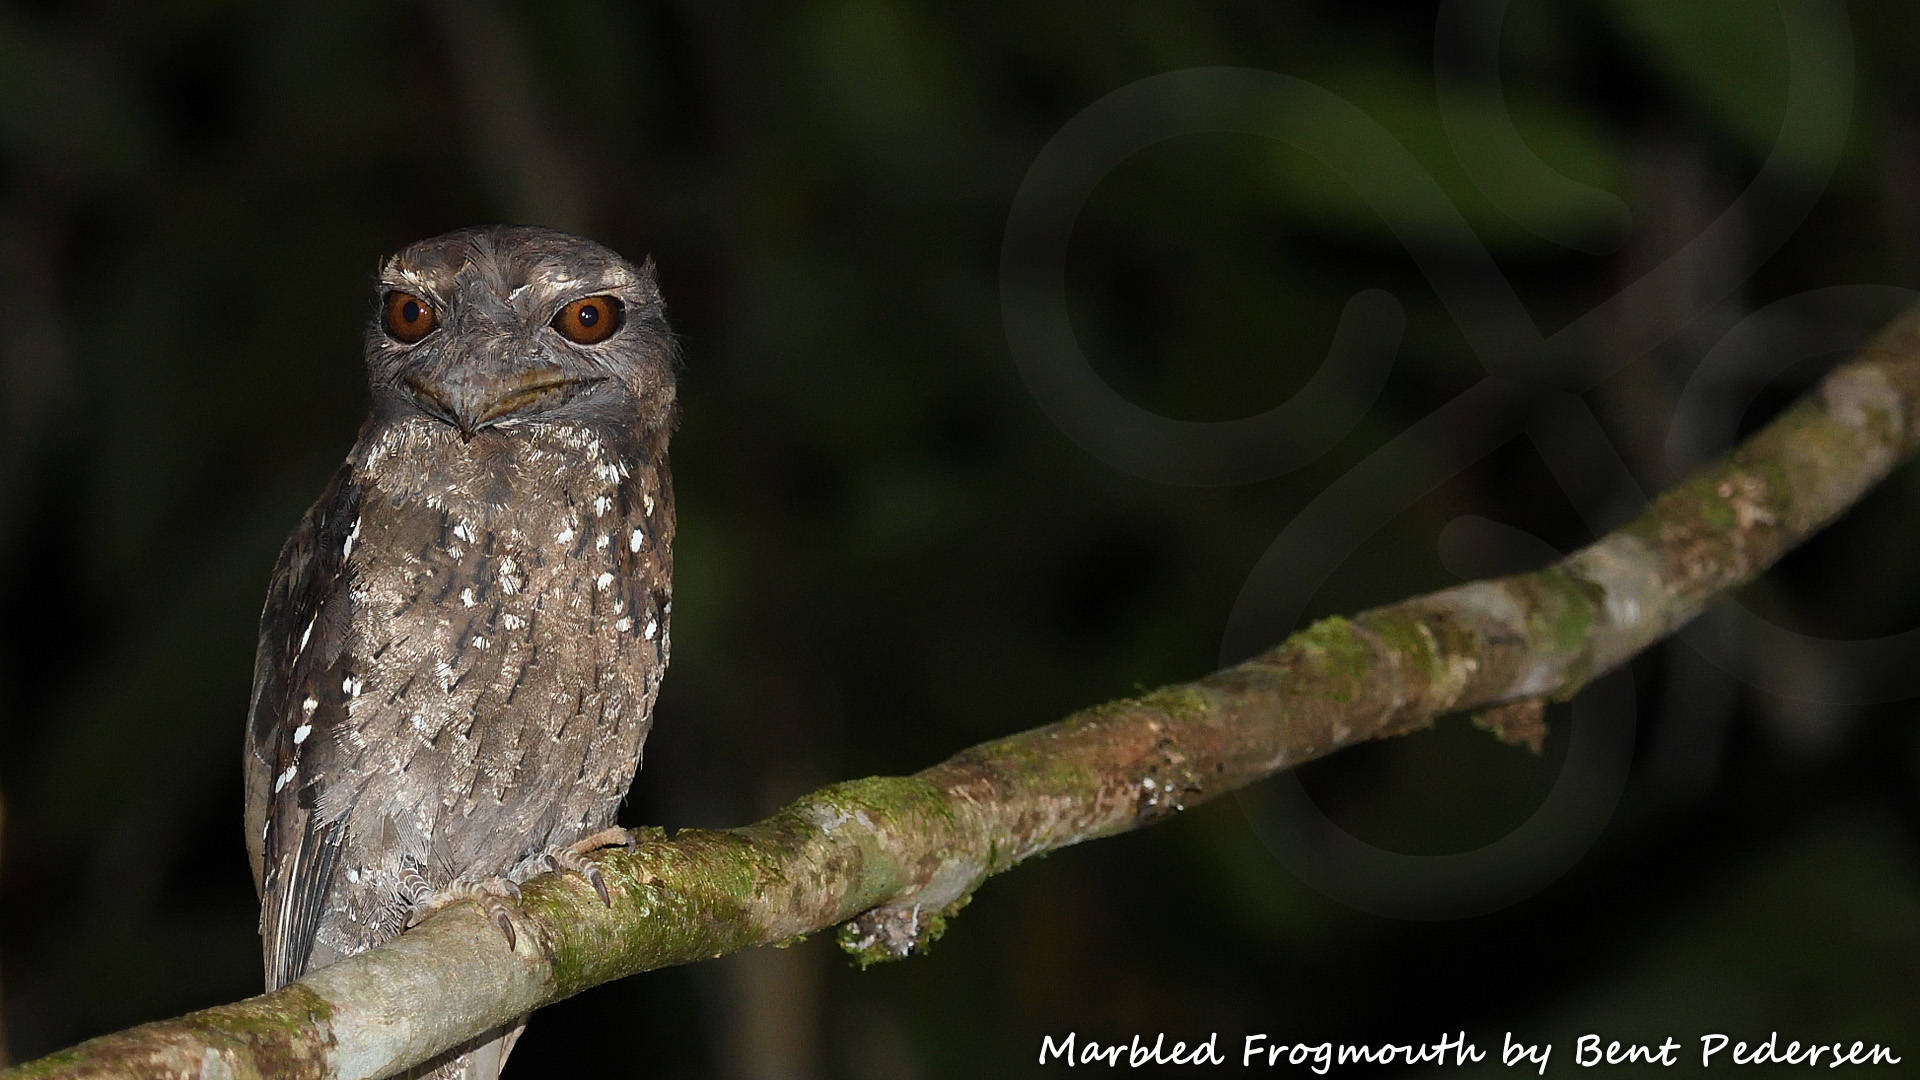 The lowland-dwelling Marbled Frogmouth Podargus ocellatus is one of 242 widespread residents in West Papua that always is a thrill to see. Copyright © Bent Pedersen